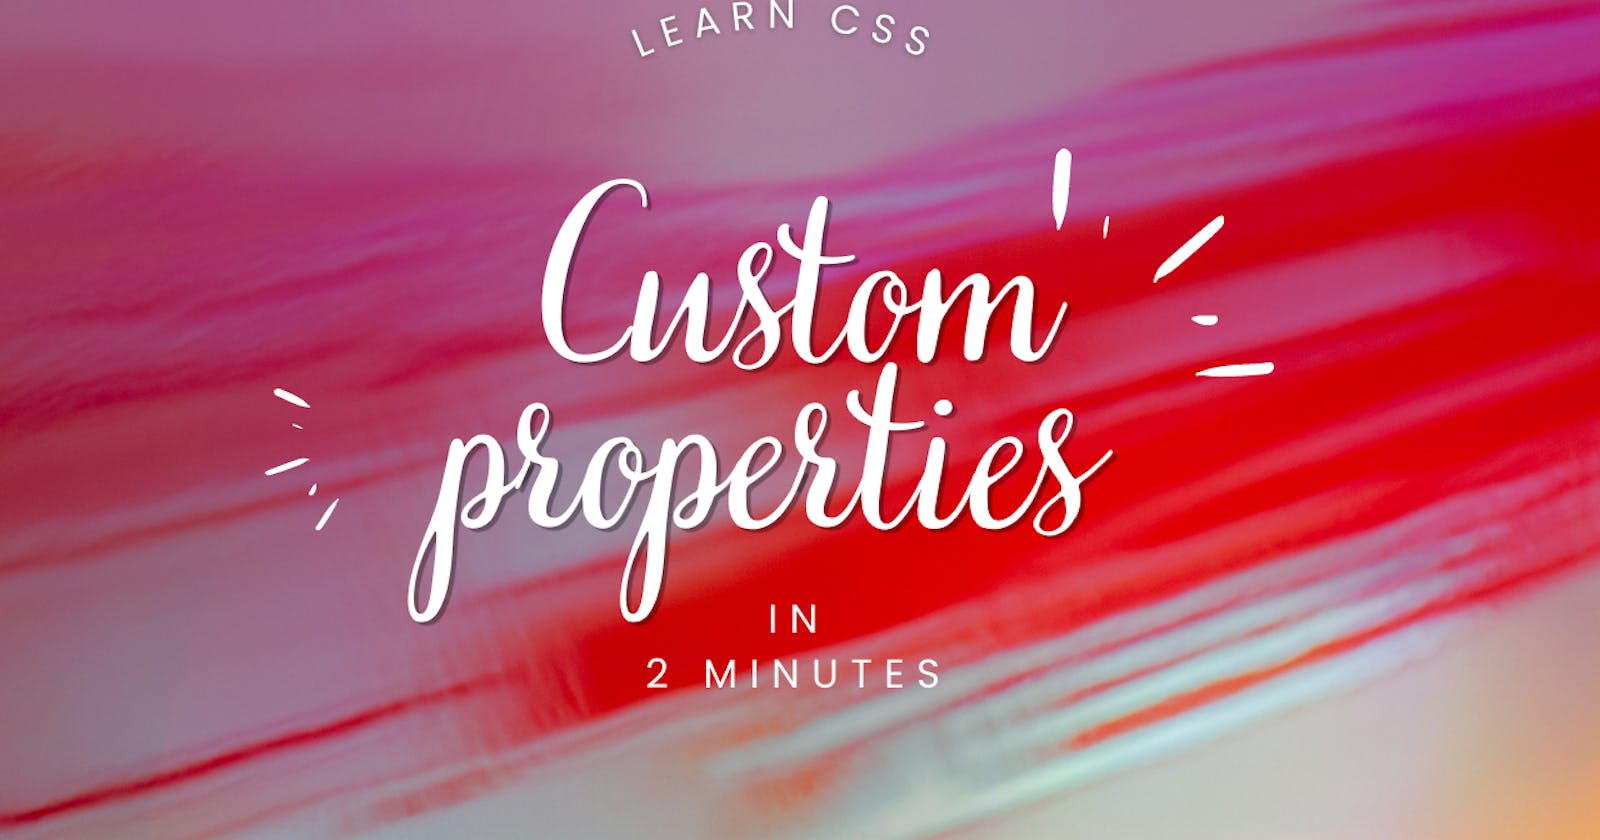 Learn CSS Custom properties ( CSS variables) in 2 minutes🙌